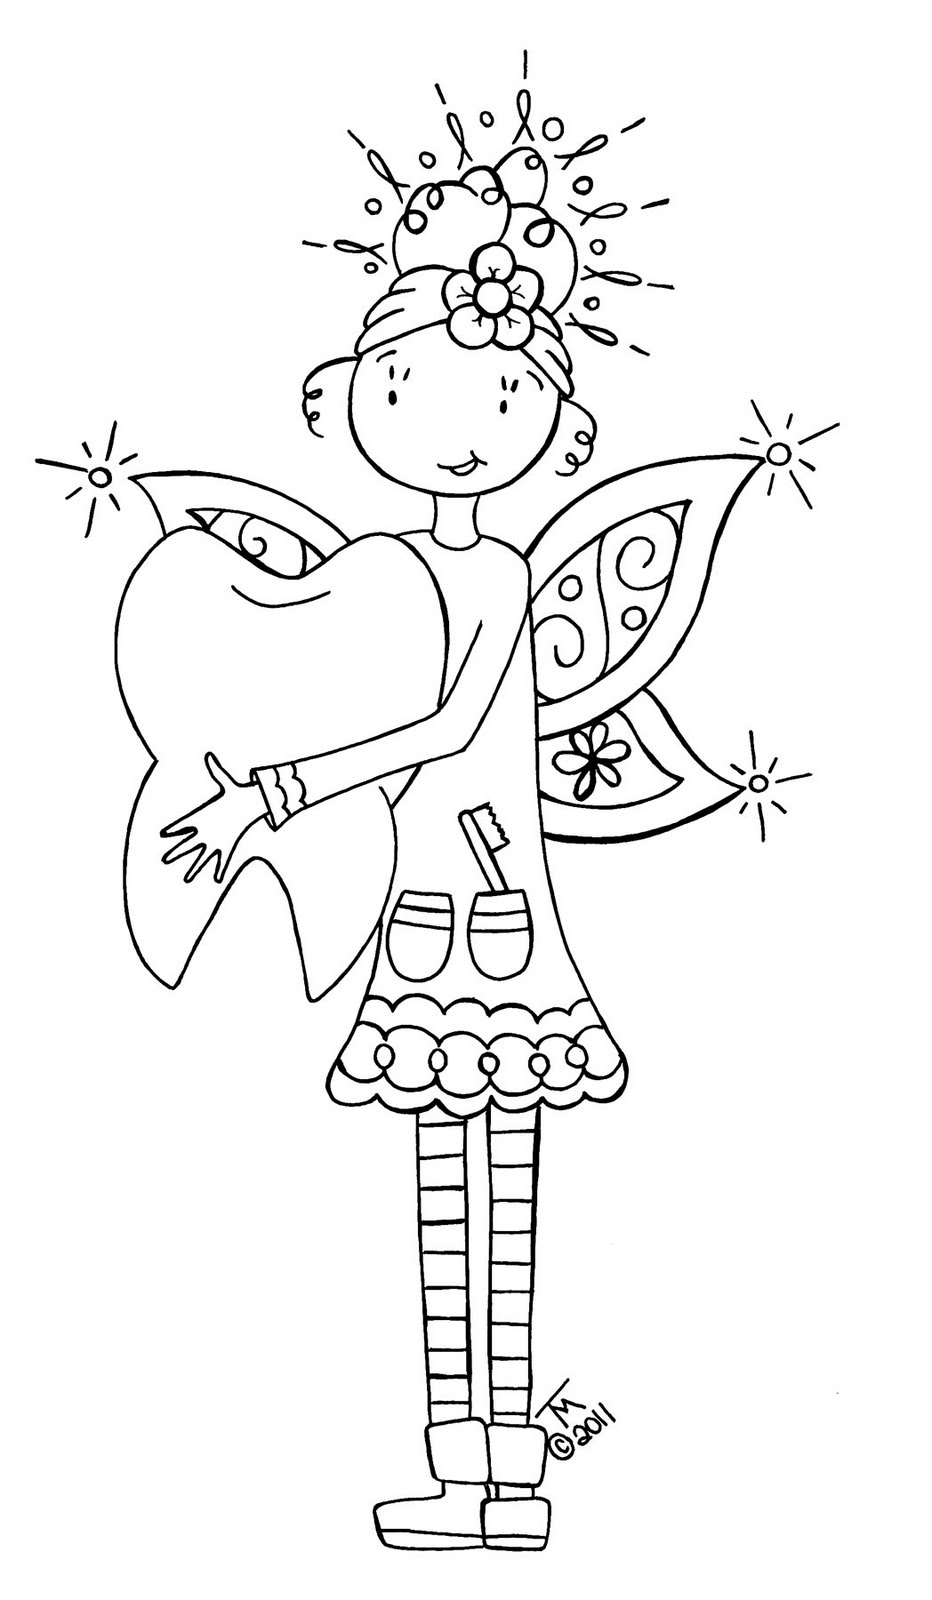 free printable tooth fairy pictures